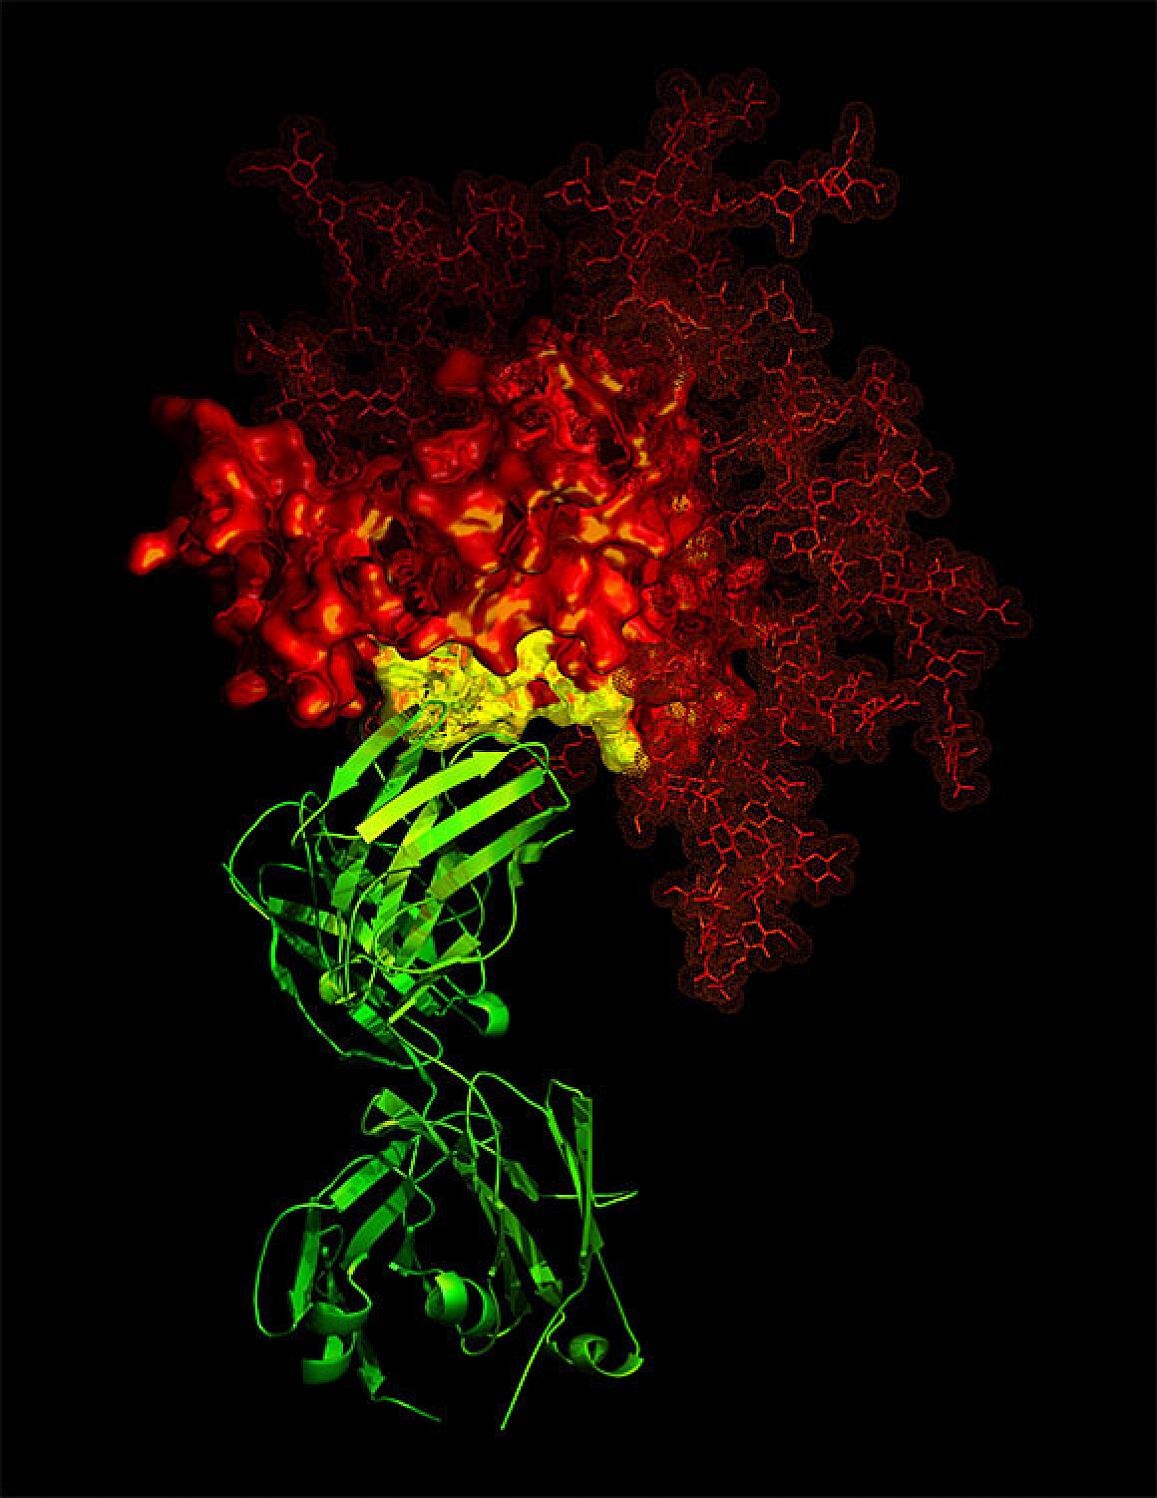 An example of antibody (green) targeting a critical area (yellow) of a viral protein (red, in this case HIV).